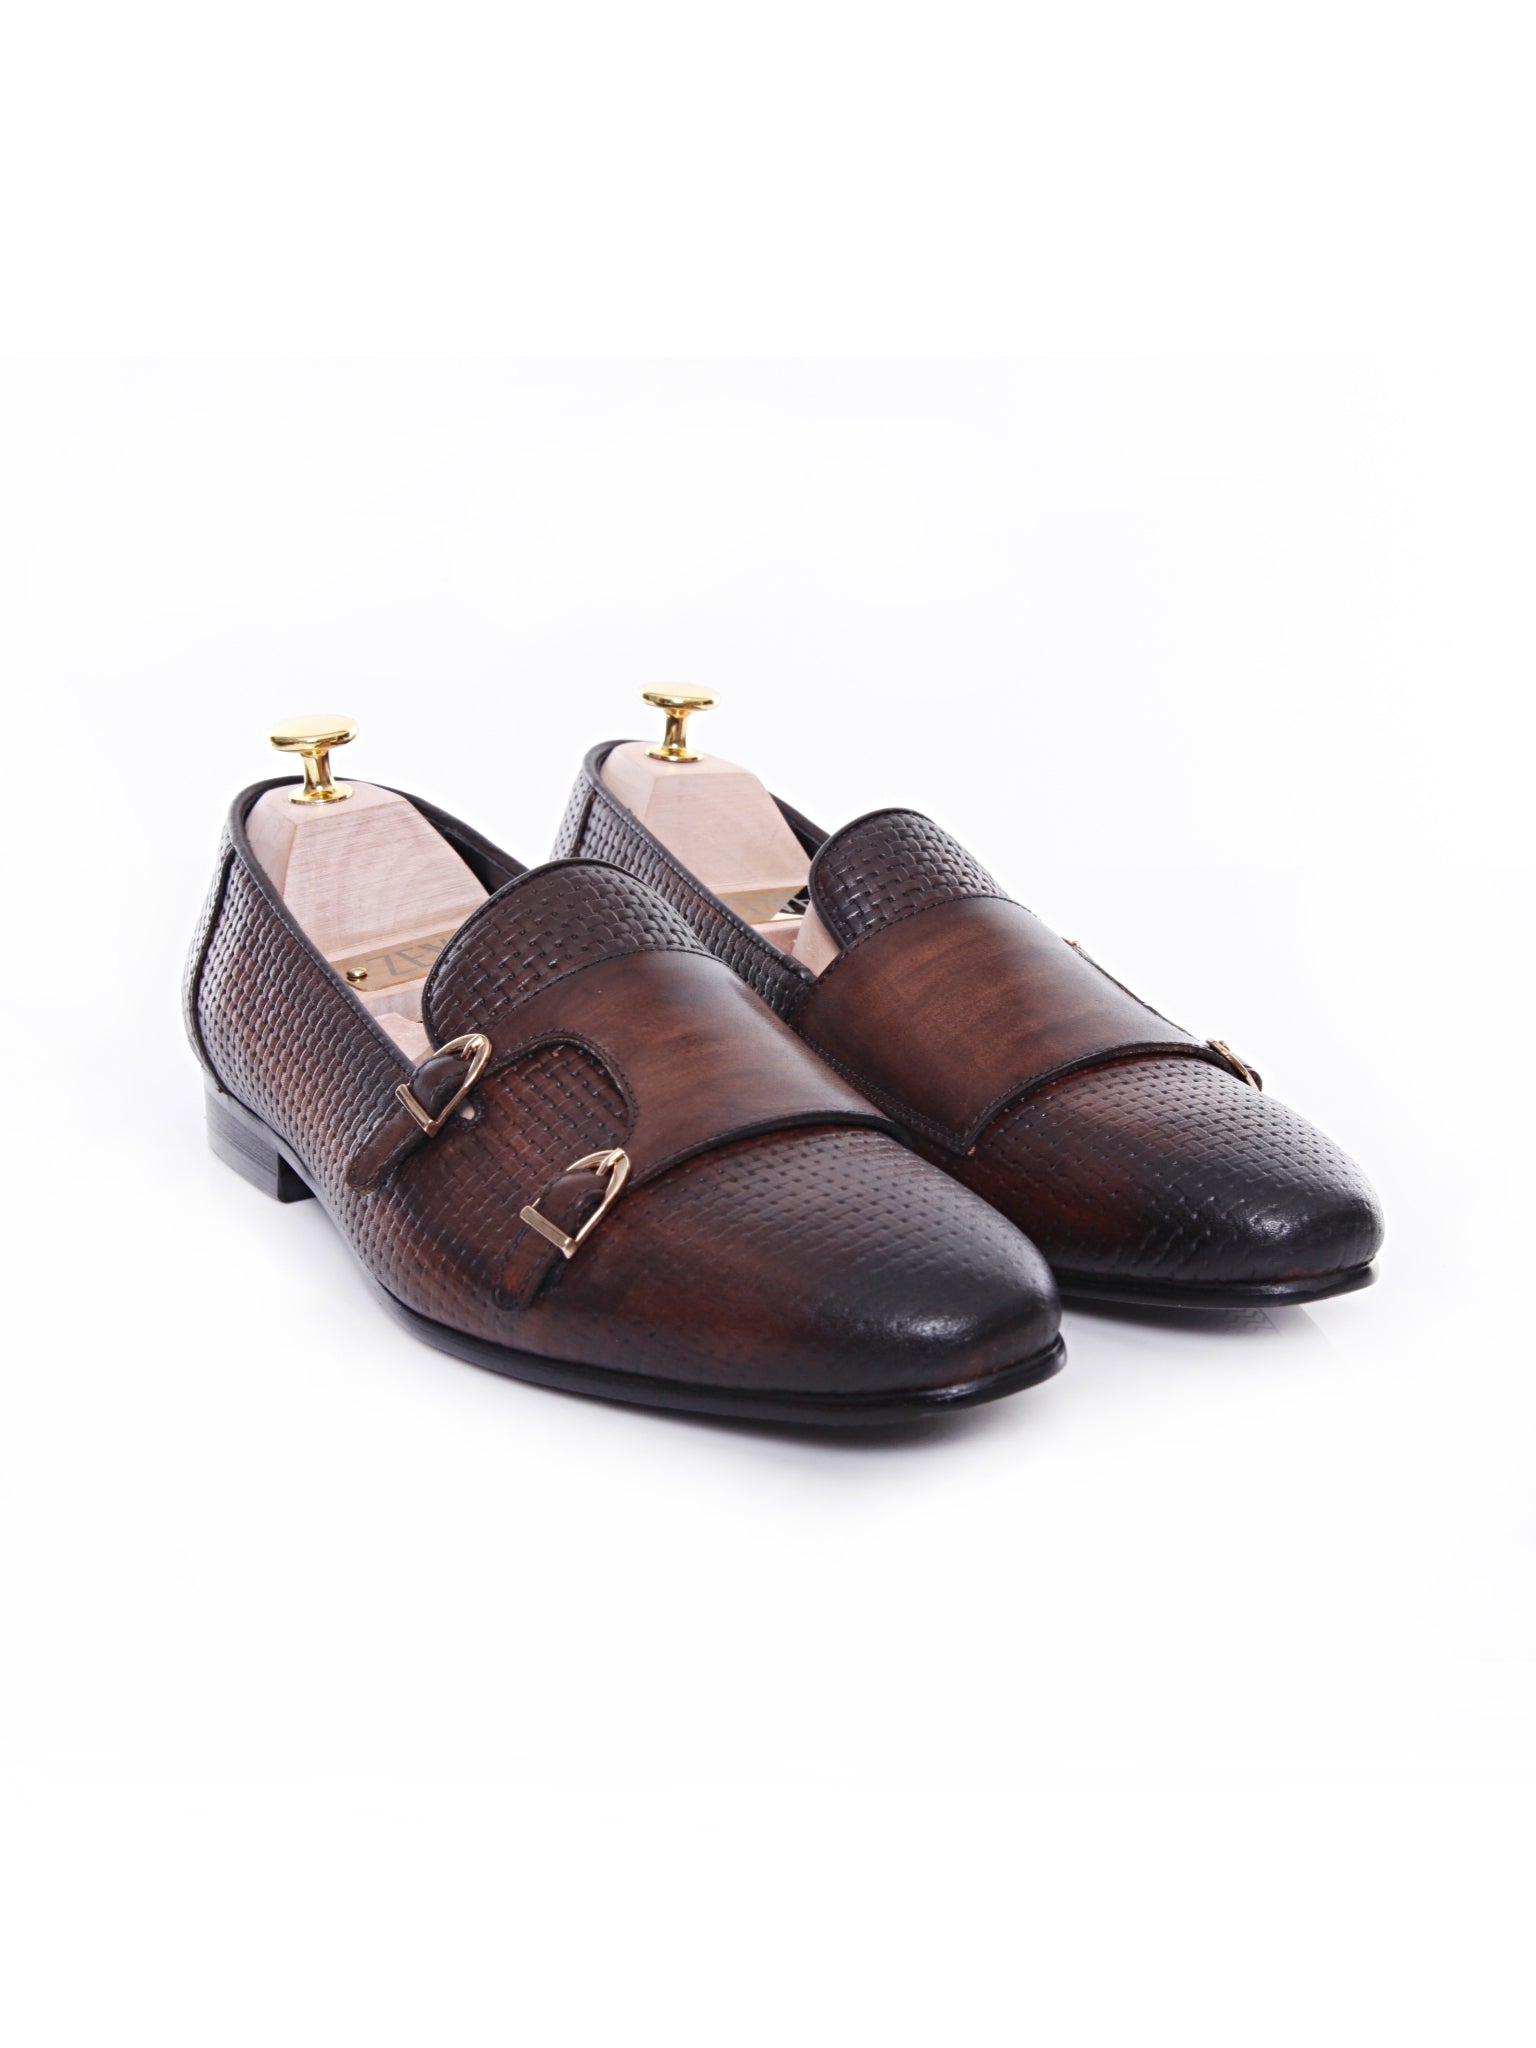 Loafer Slipper - Dark Brown Double Monk Strap with Woven Leather (Hand Painted Patina) - Zeve Shoes